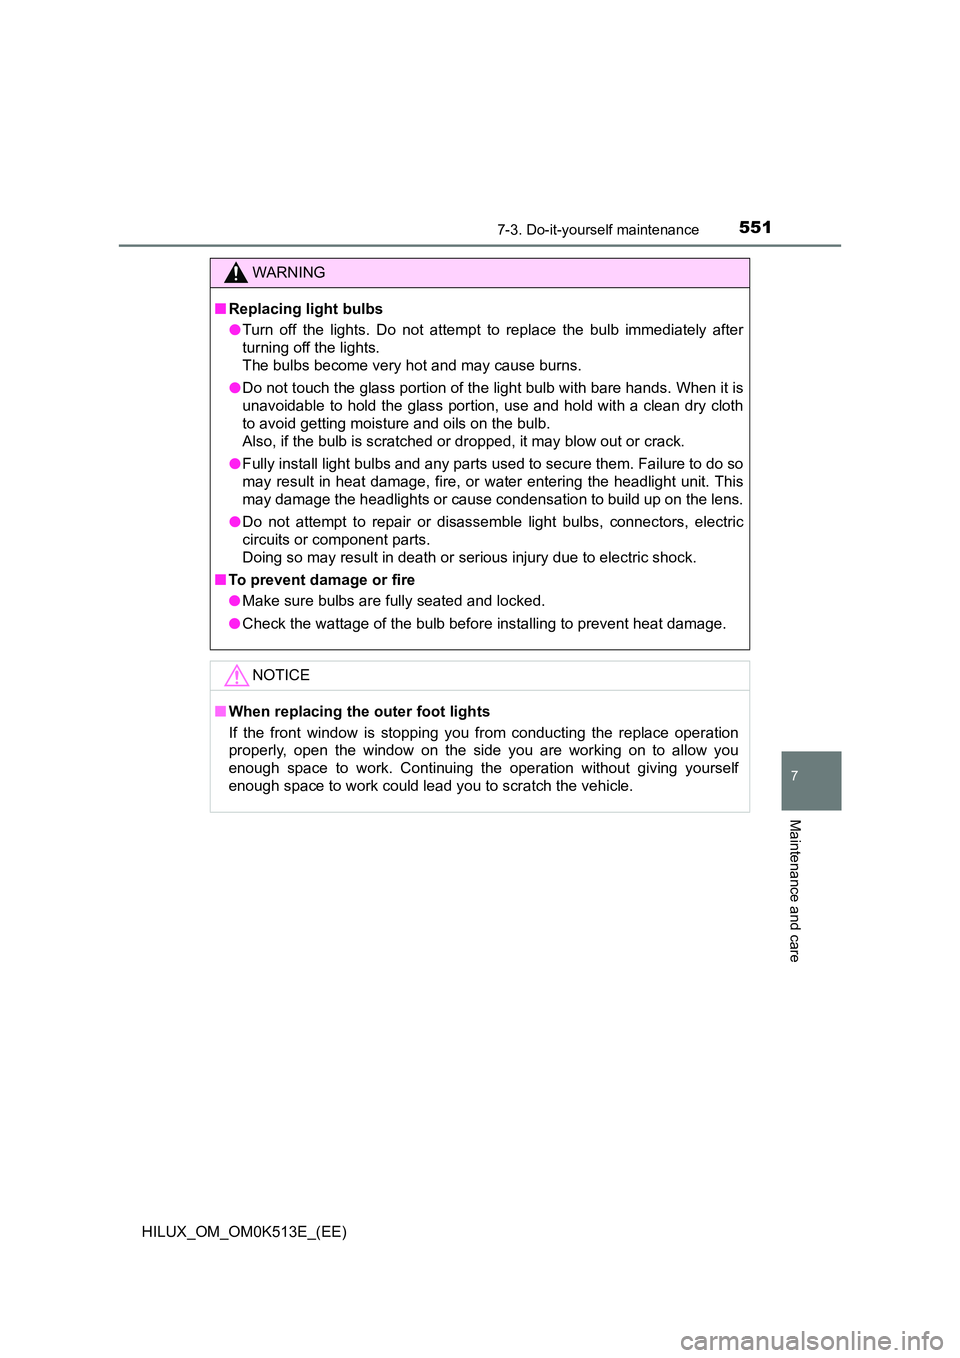 TOYOTA HILUX 2021  Owners Manual (in English) 5517-3. Do-it-yourself maintenance
HILUX_OM_OM0K513E_(EE)
7
Maintenance and care
WARNING
�QReplacing light bulbs 
�O Turn off the lights. Do not attempt to replace the bulb immediately after 
turning 